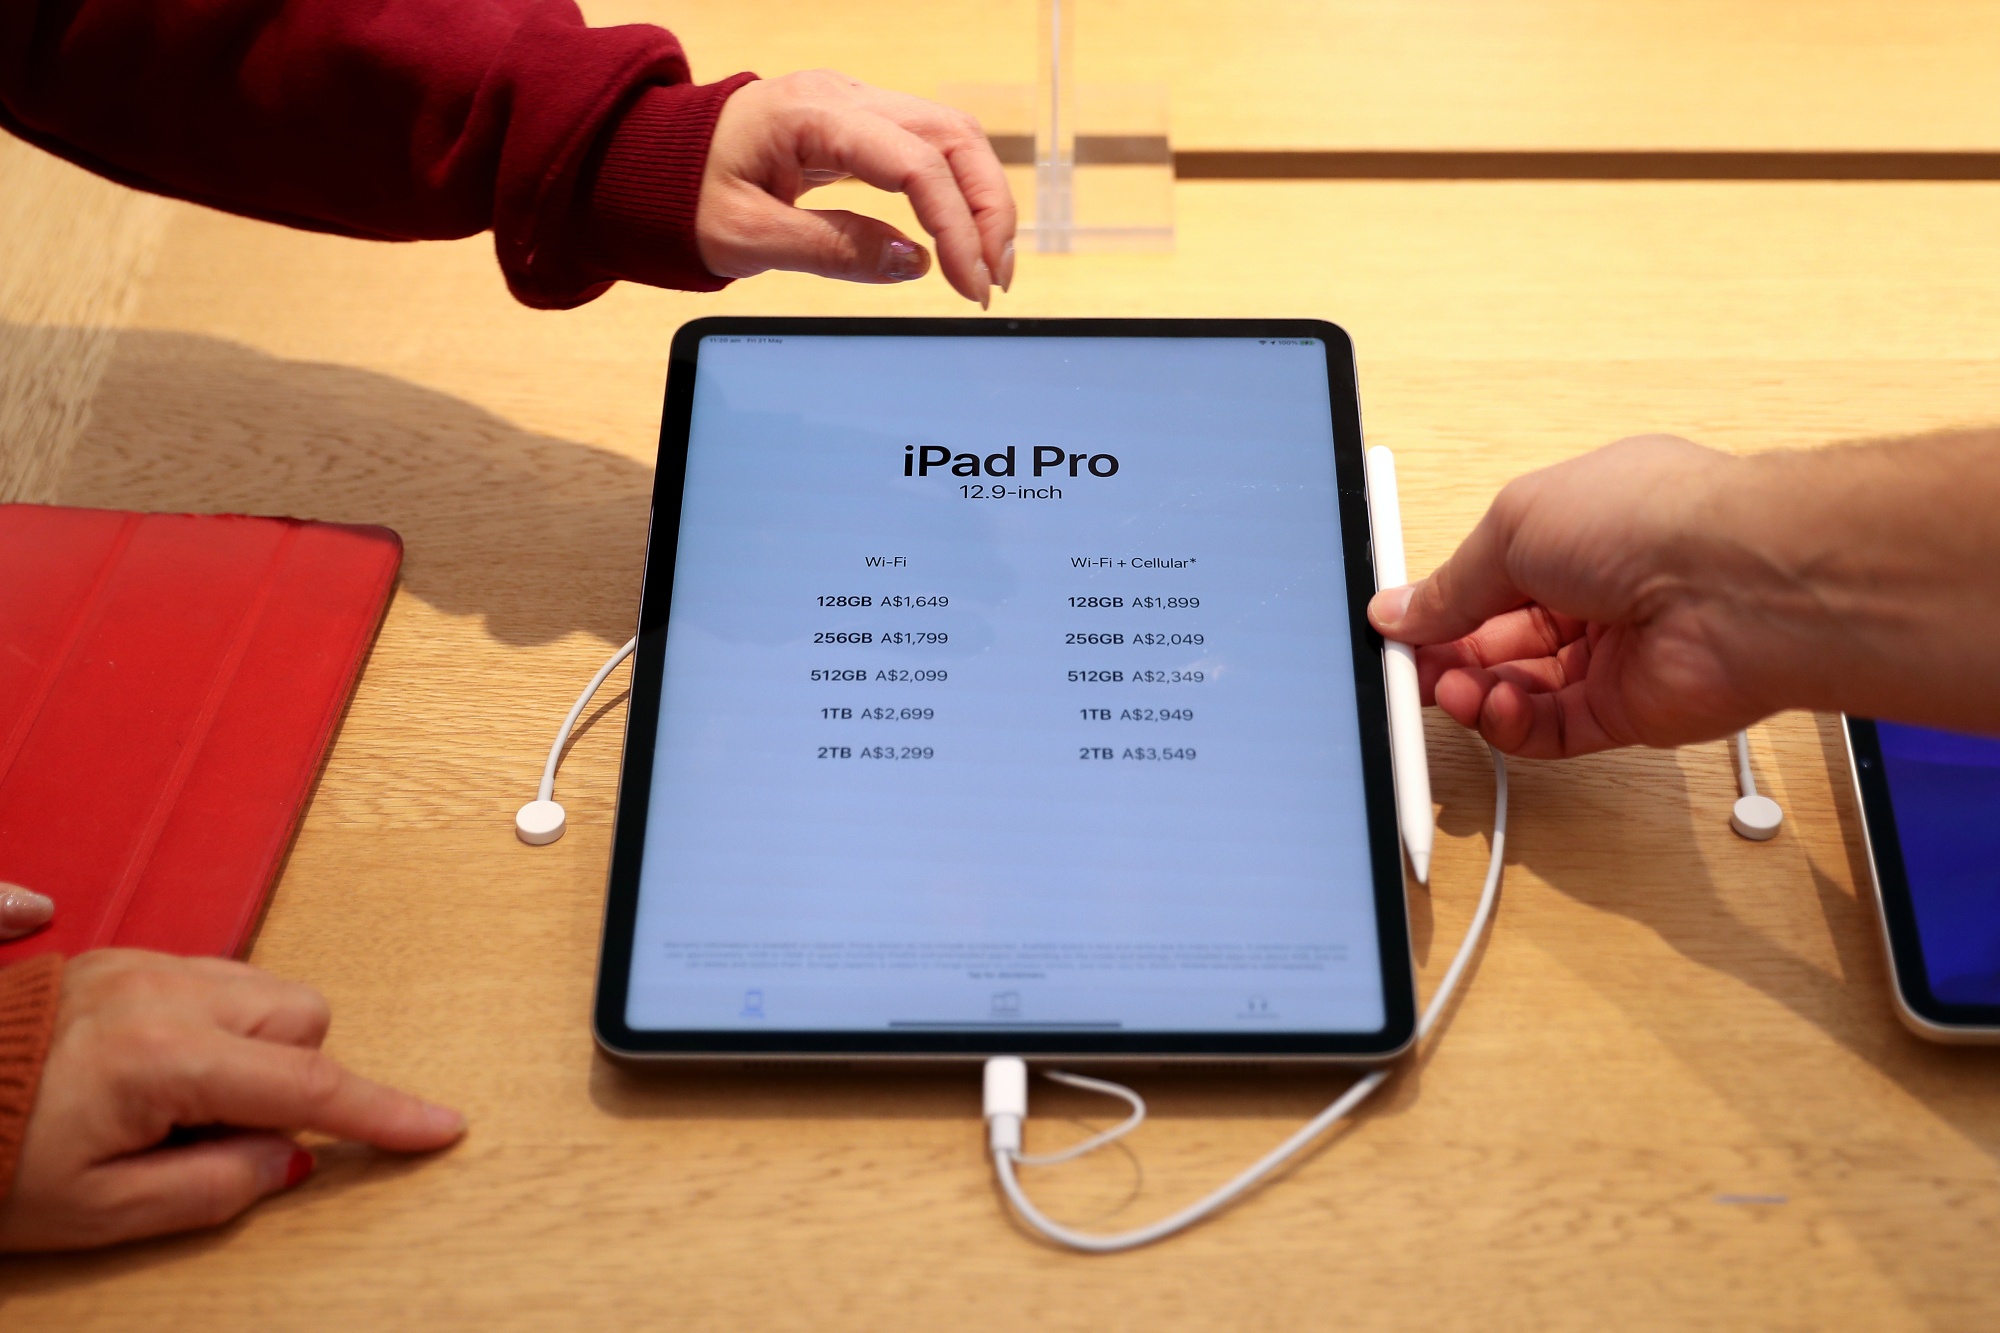 The move marks an end to the longest stretch without new models in the history of the iPad.